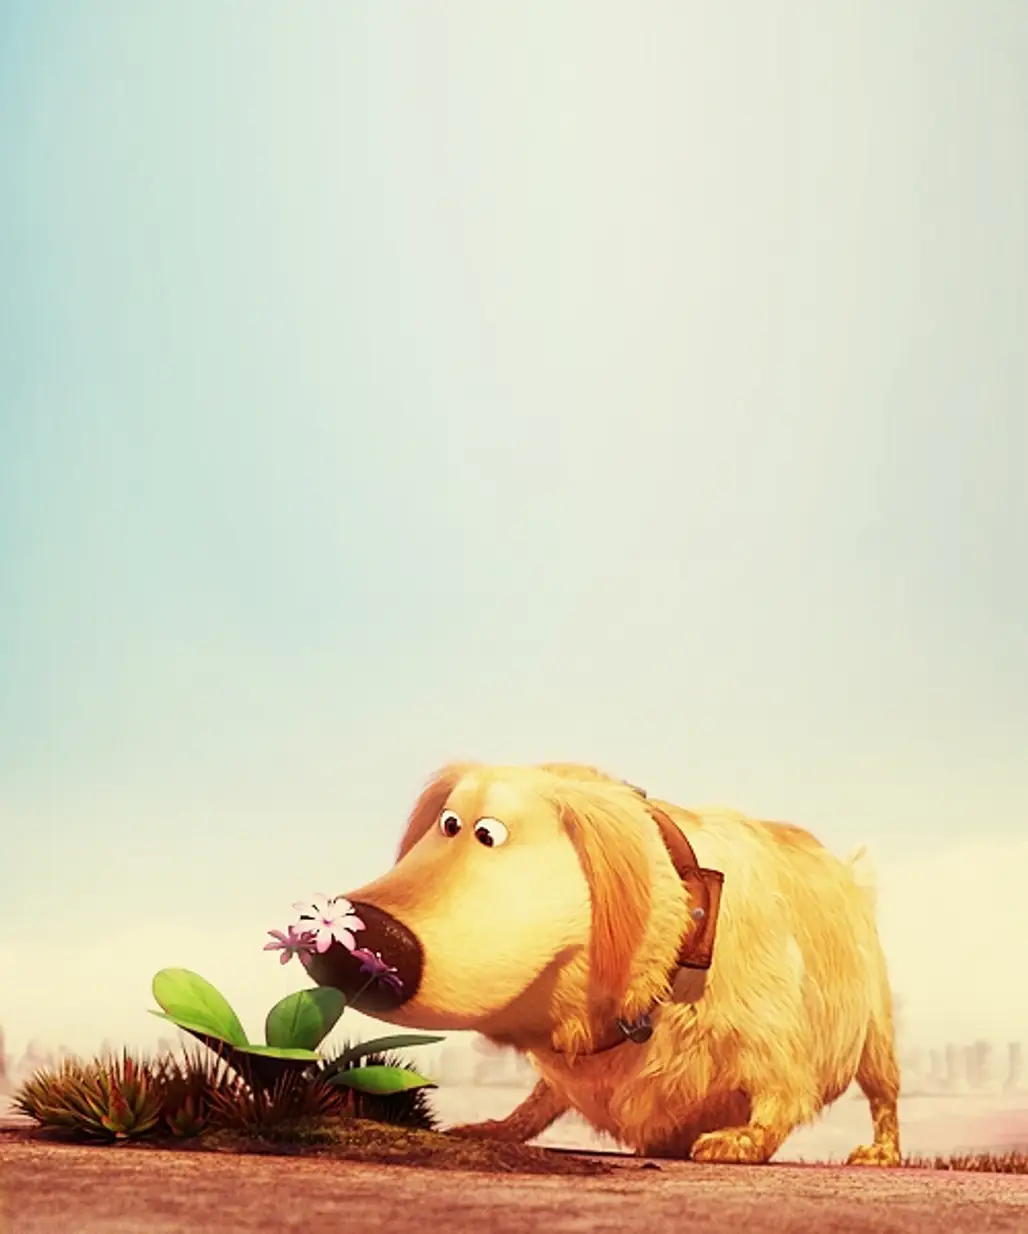 Dug from up!